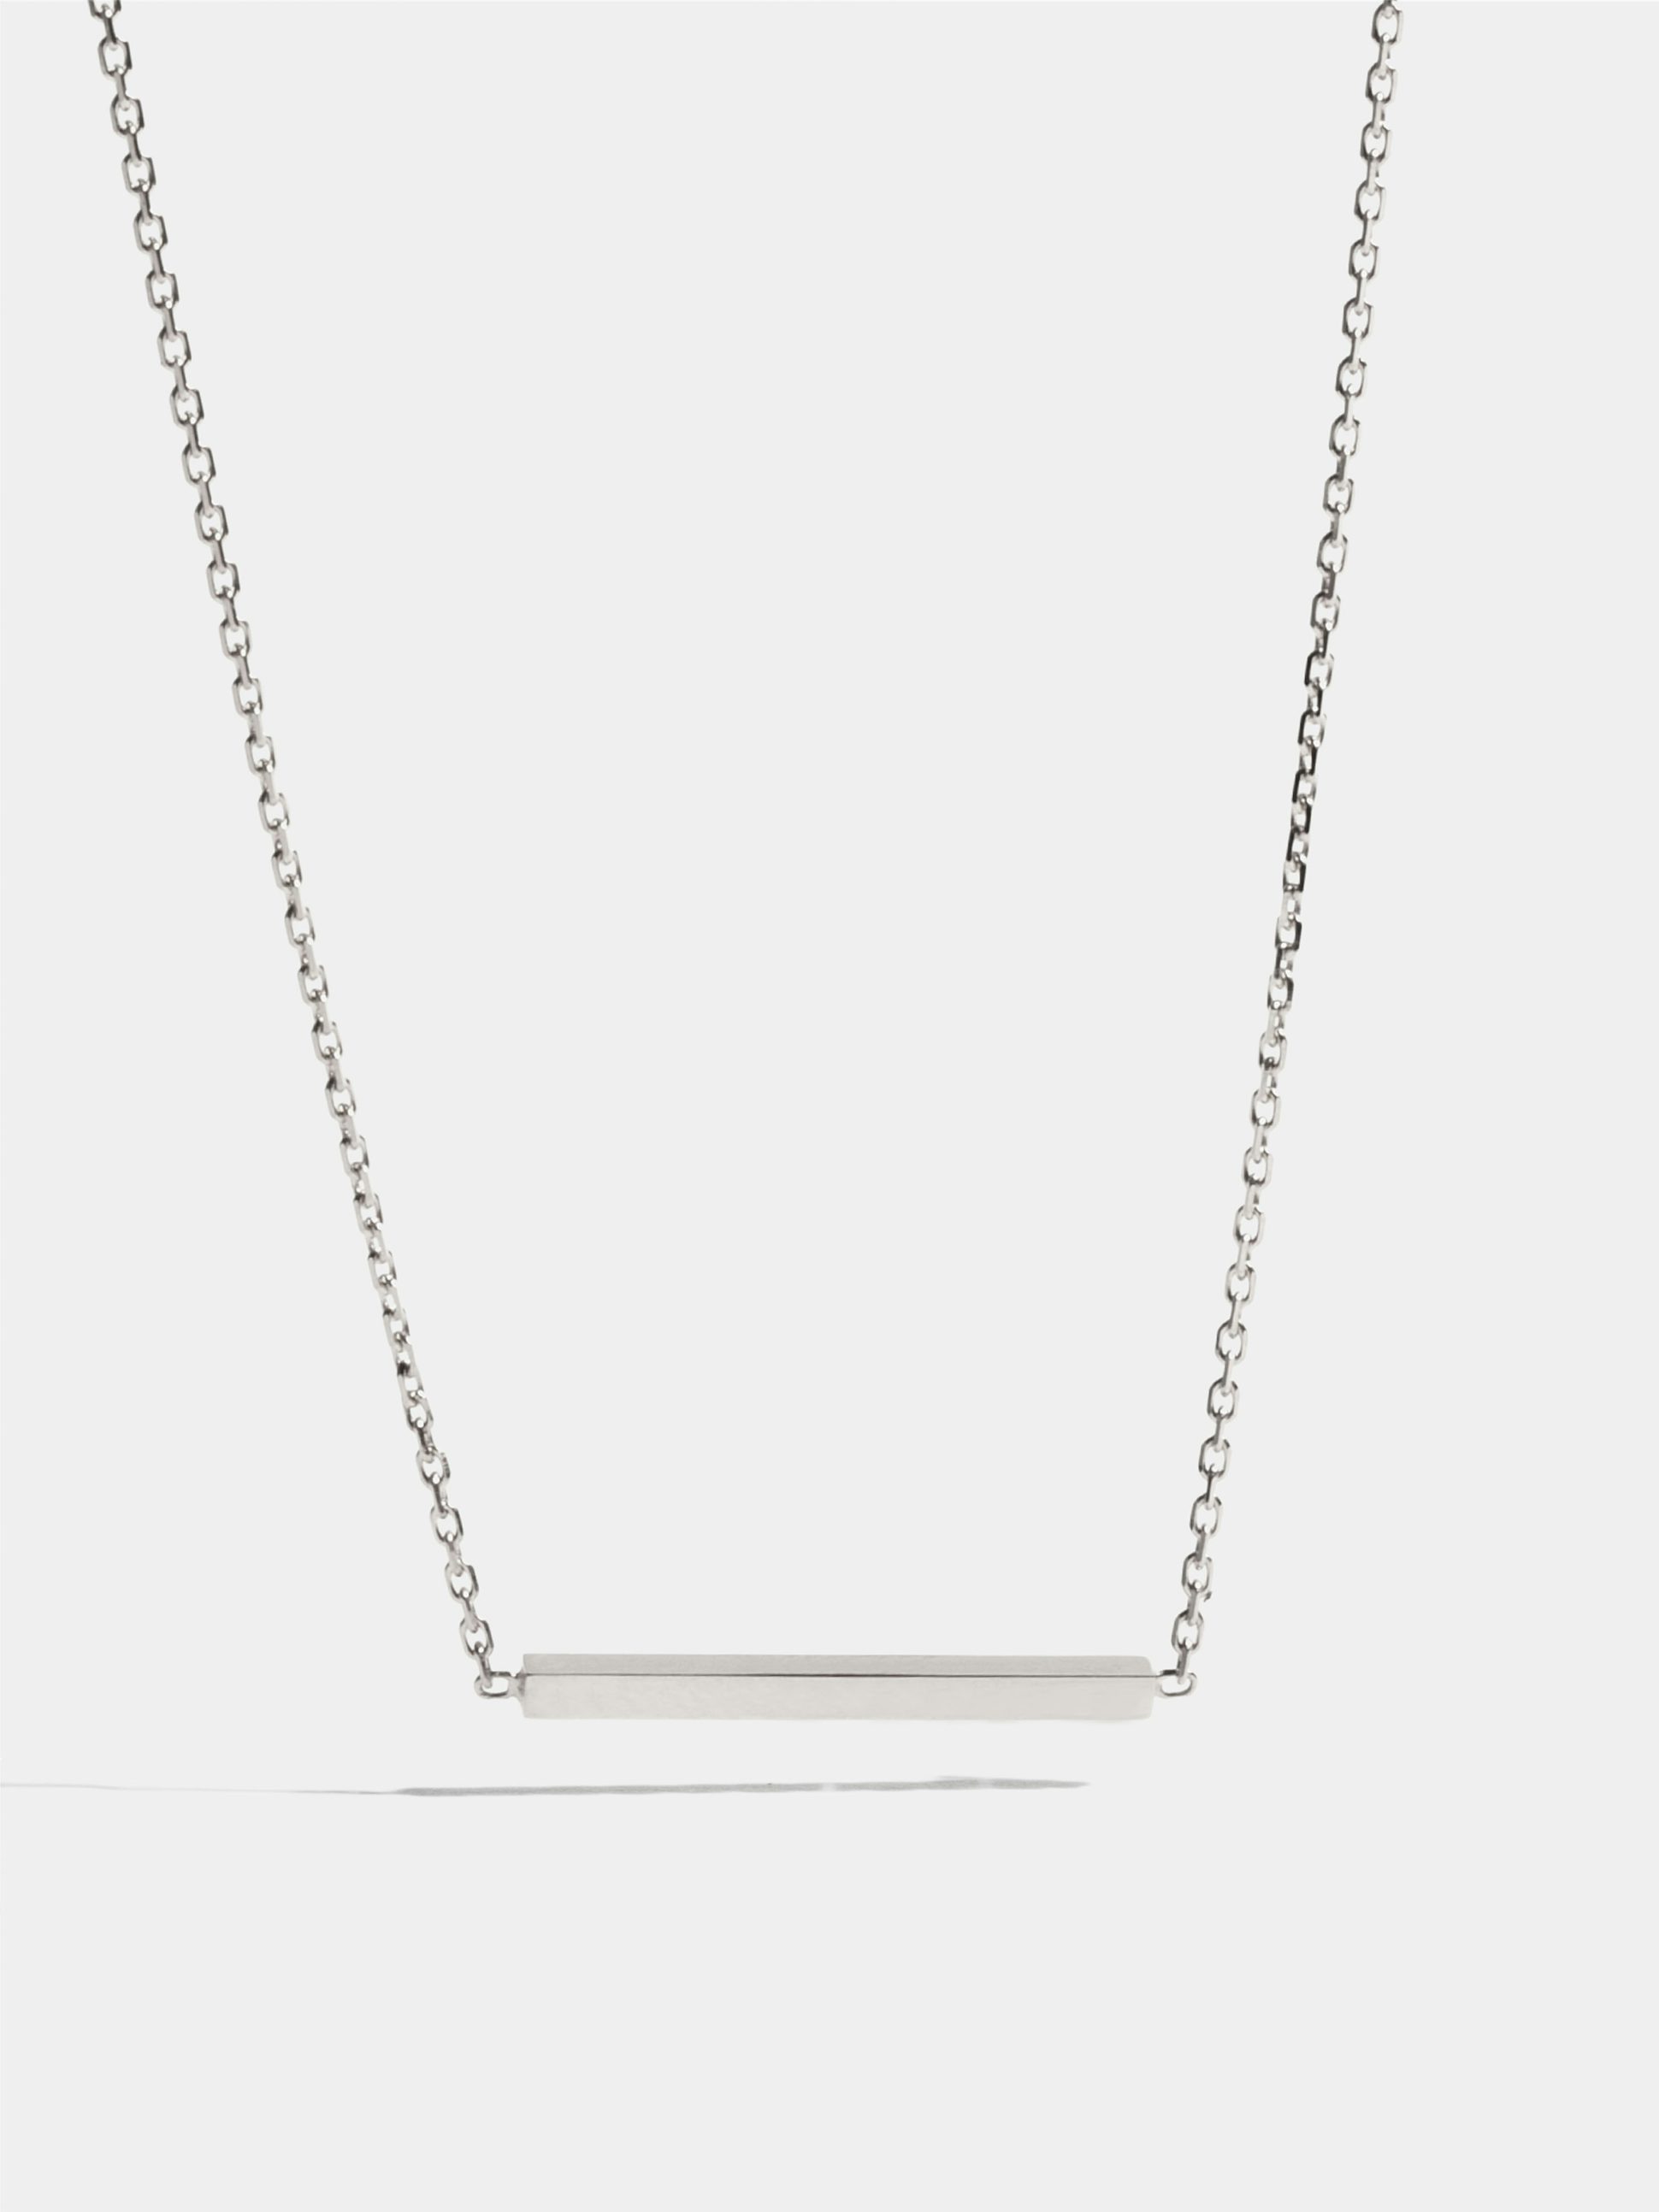 Anagramme polished motif in white gold 18k Fairmined ethical, on 42 cm chain